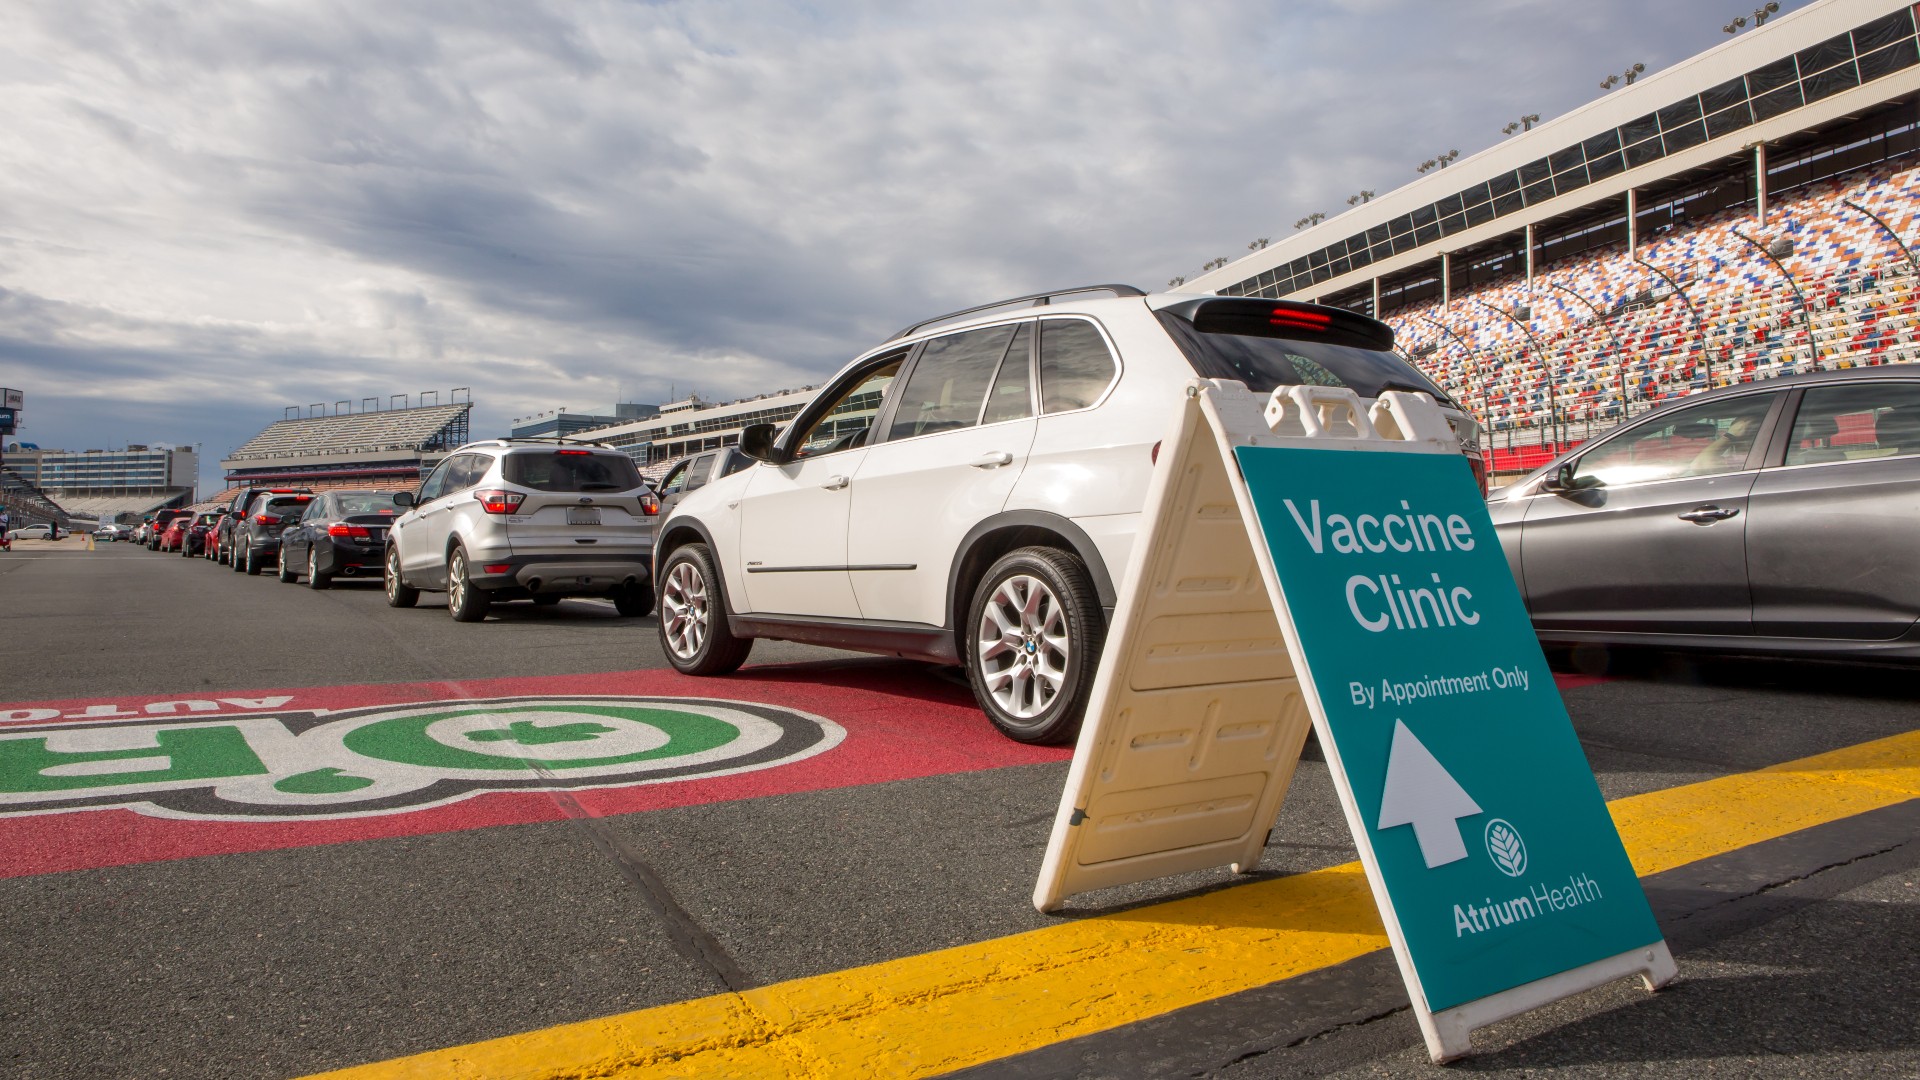 As more people continue to become eligible to receive the COVID-19 vaccine, a unique public-private partnership will host the first of several mass vaccination events in the community beginning today, Jan. 22, at Charlotte Motor Speedway.